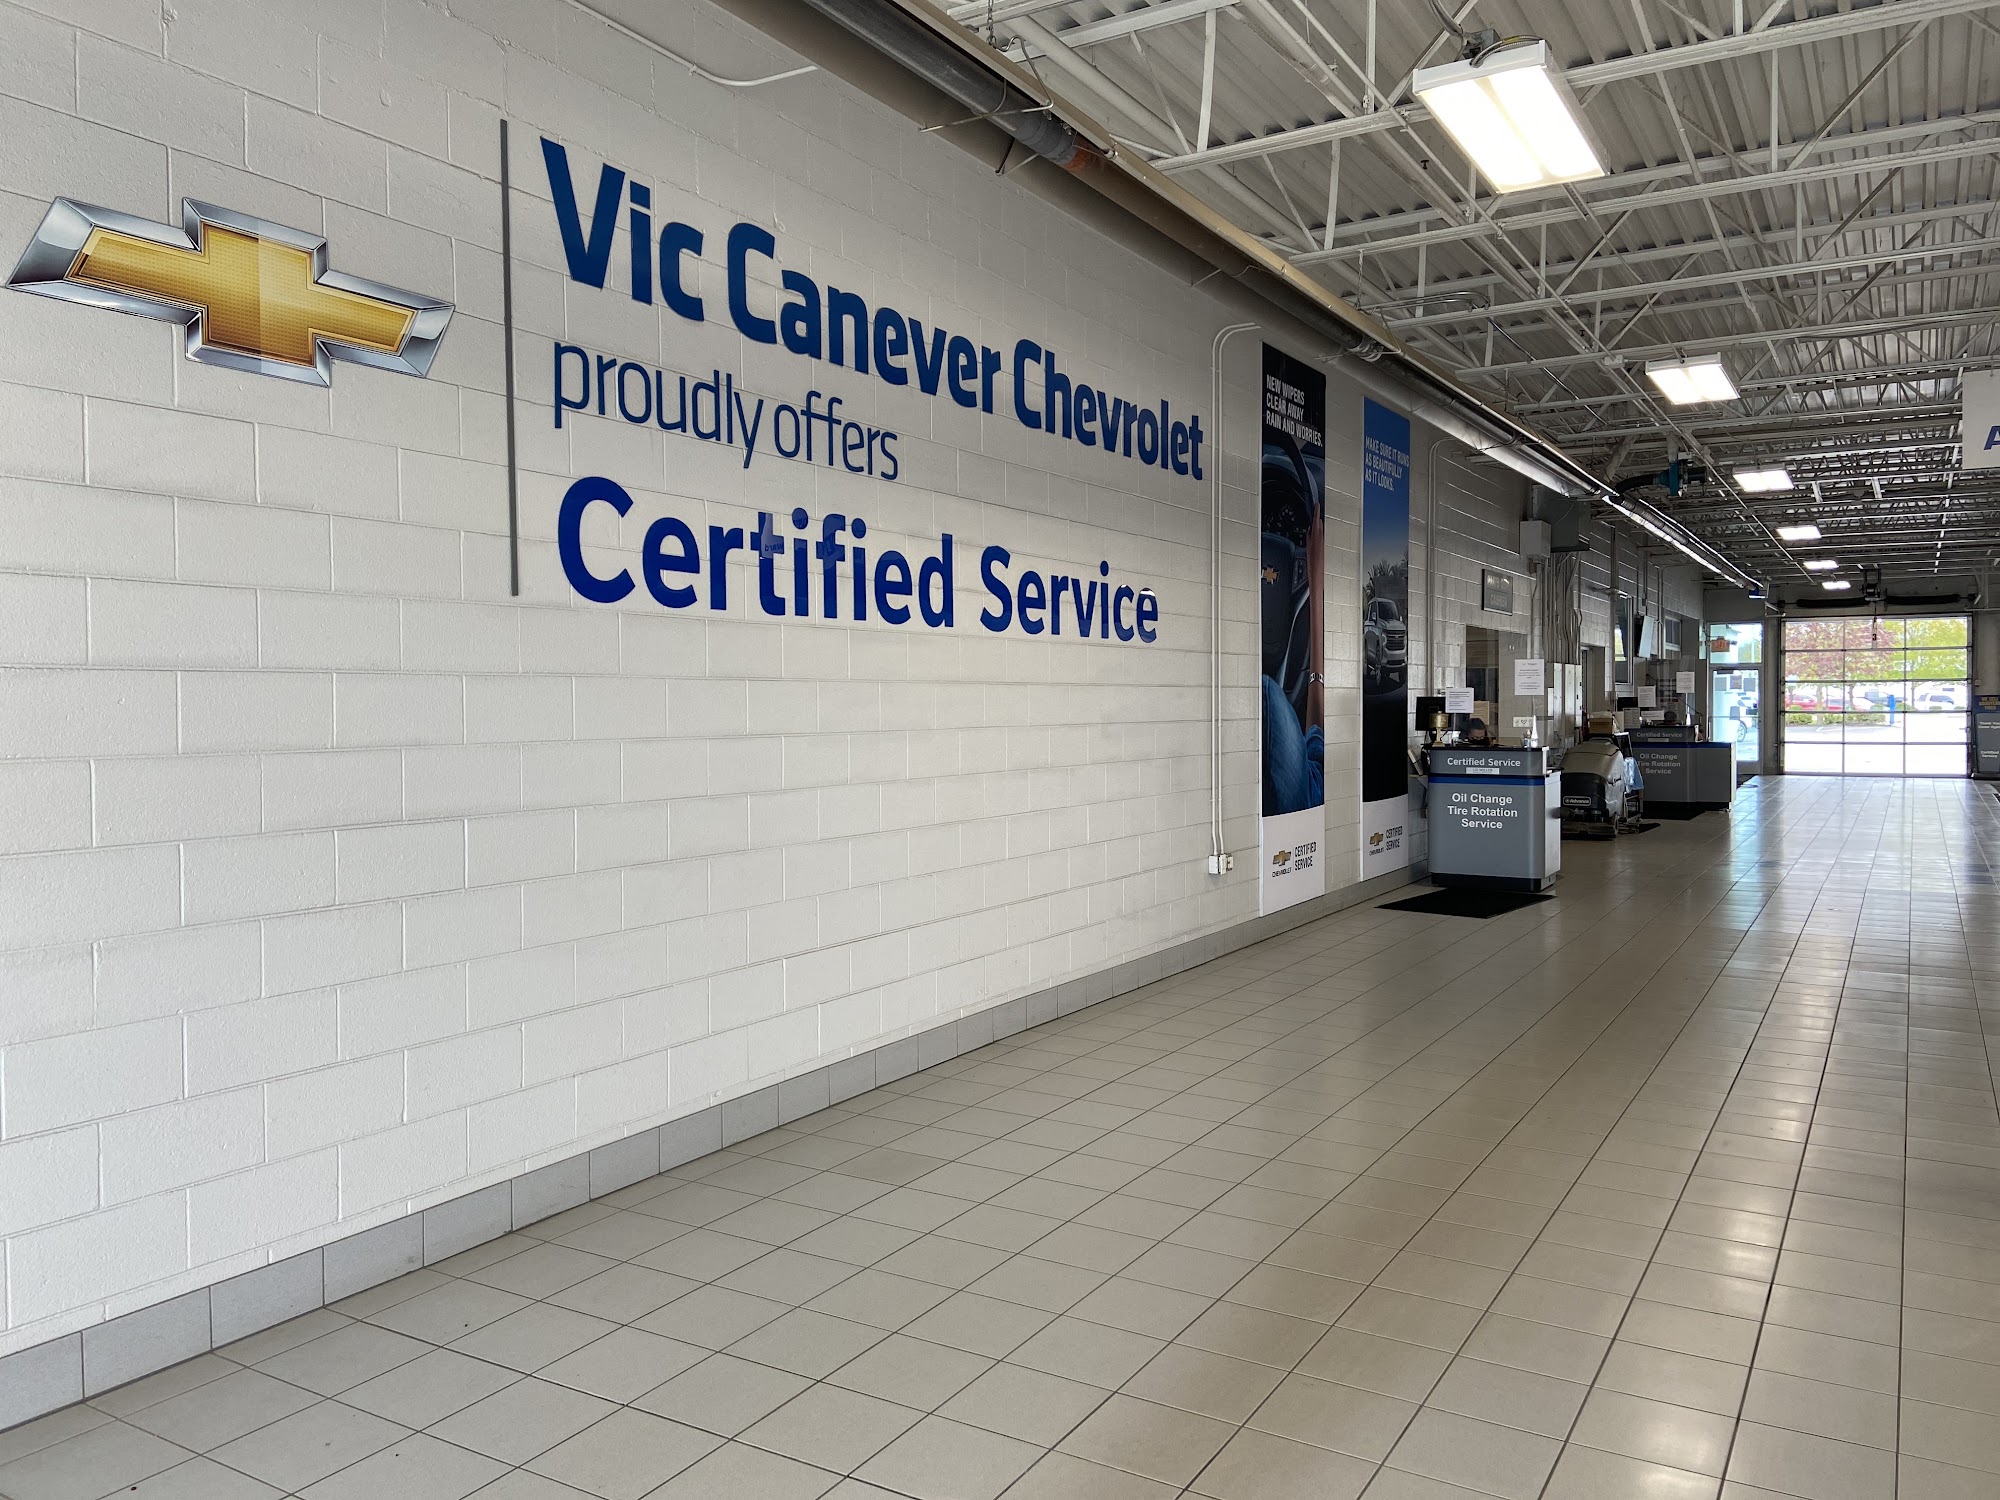 Vic Canever Chevrolet Service